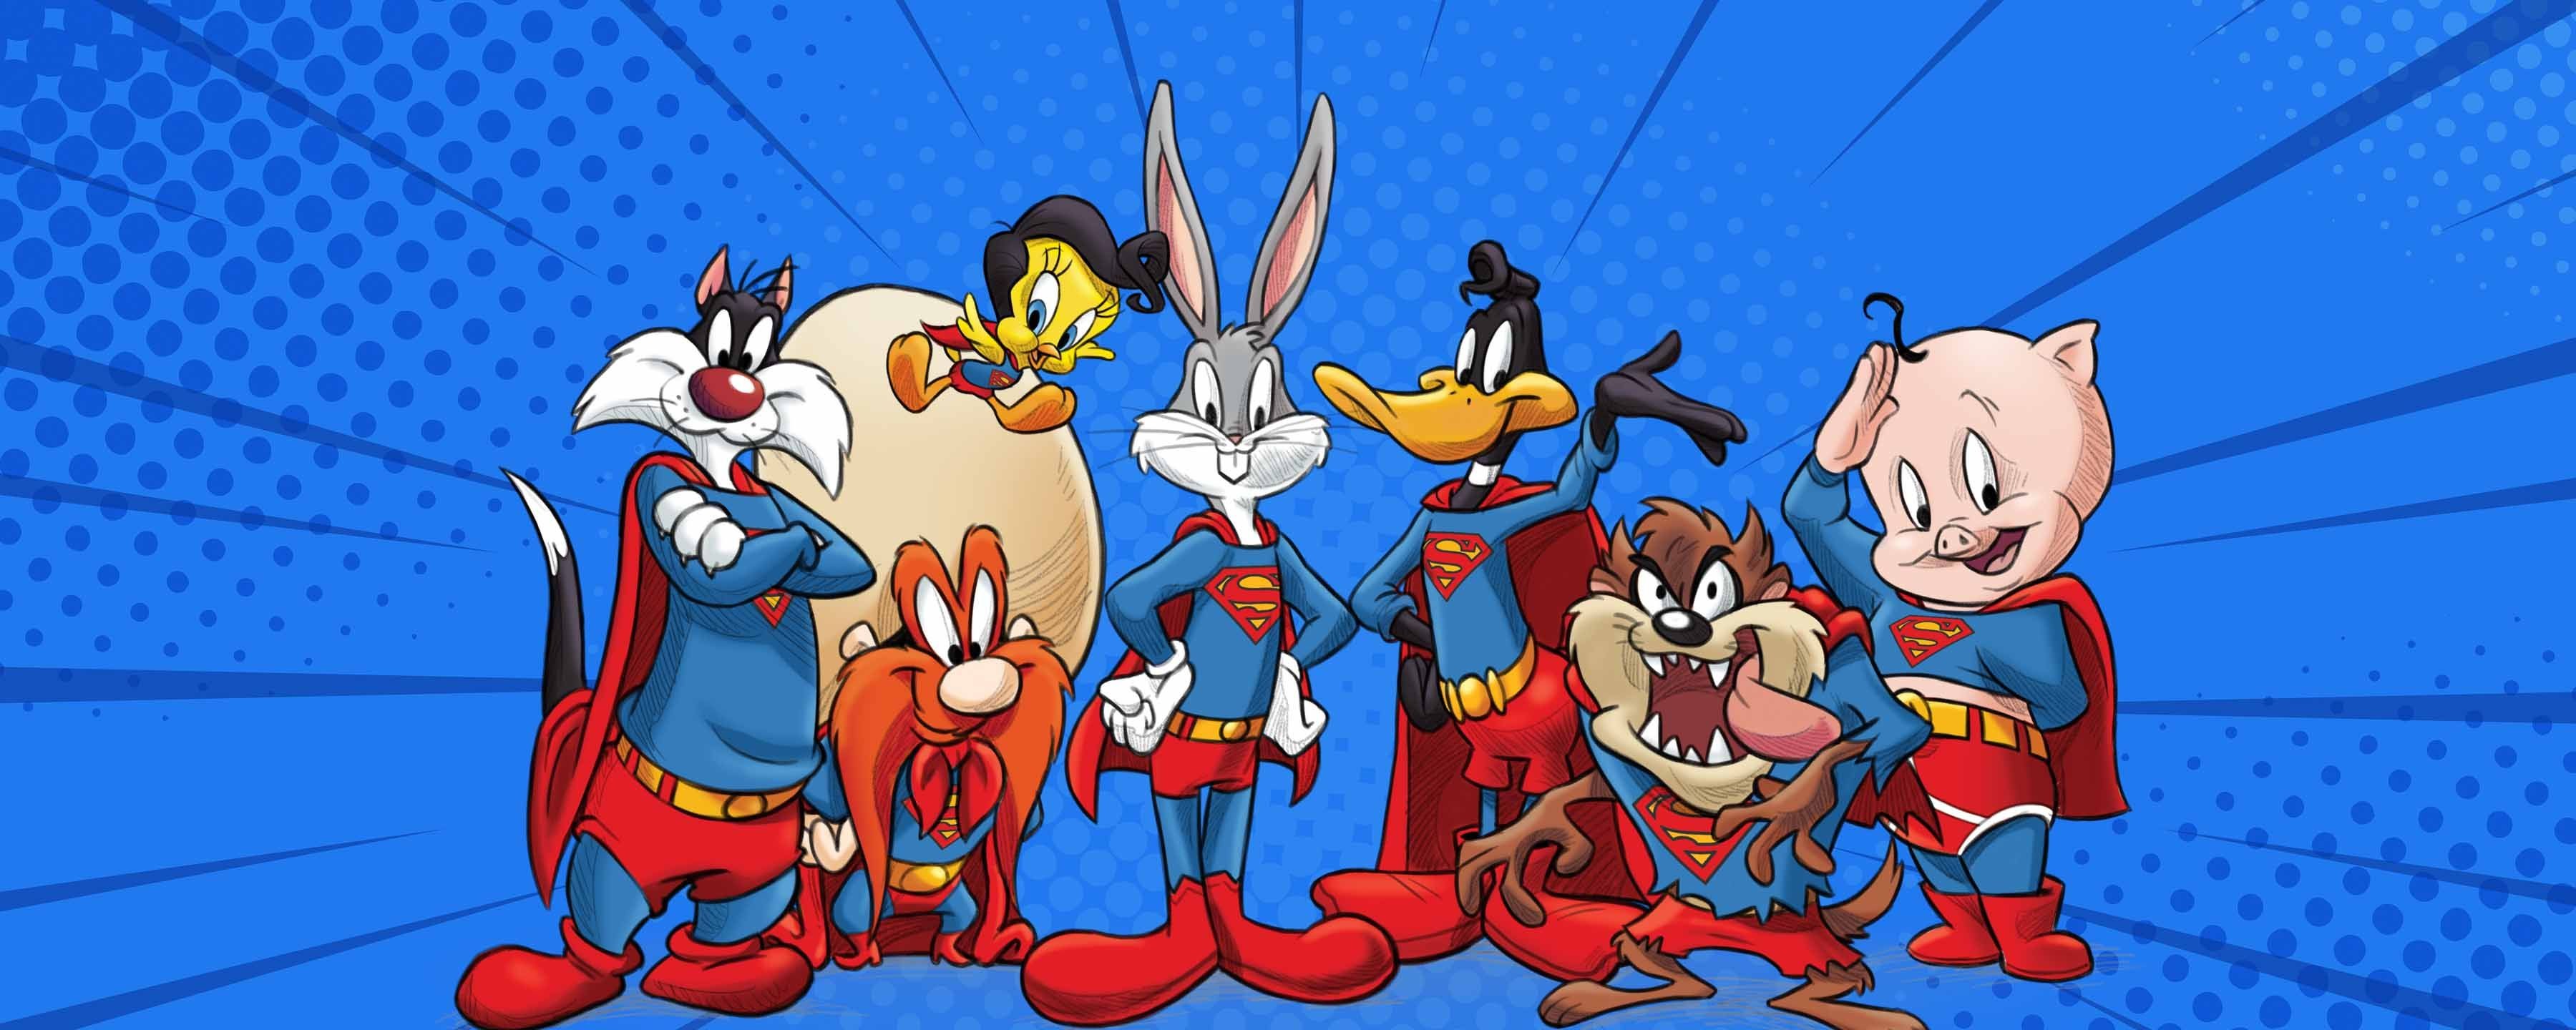 What's Up, Doc? Exclusive Looney Tunes Mash-ups